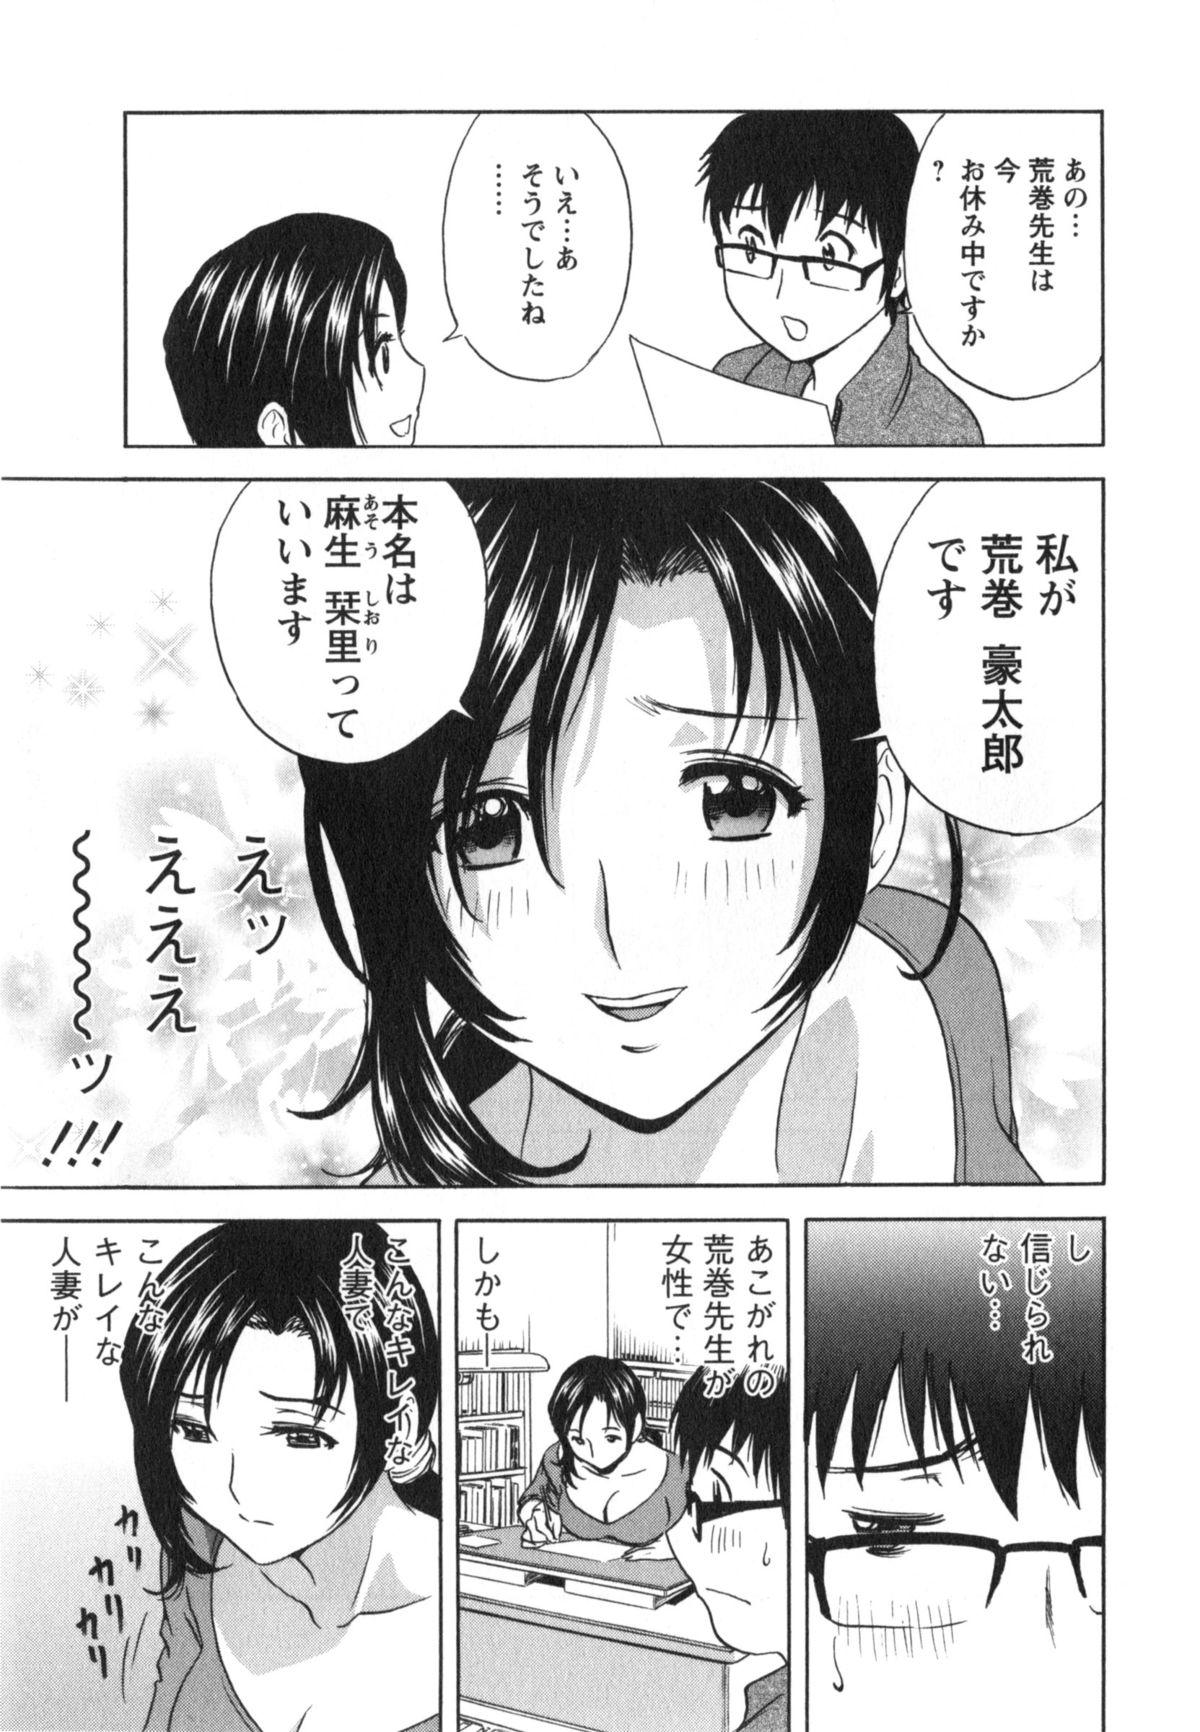 Sexcam Manga no youna Hitozuma to no Hibi - Days with Married Women such as Comics. Indoor - Page 14